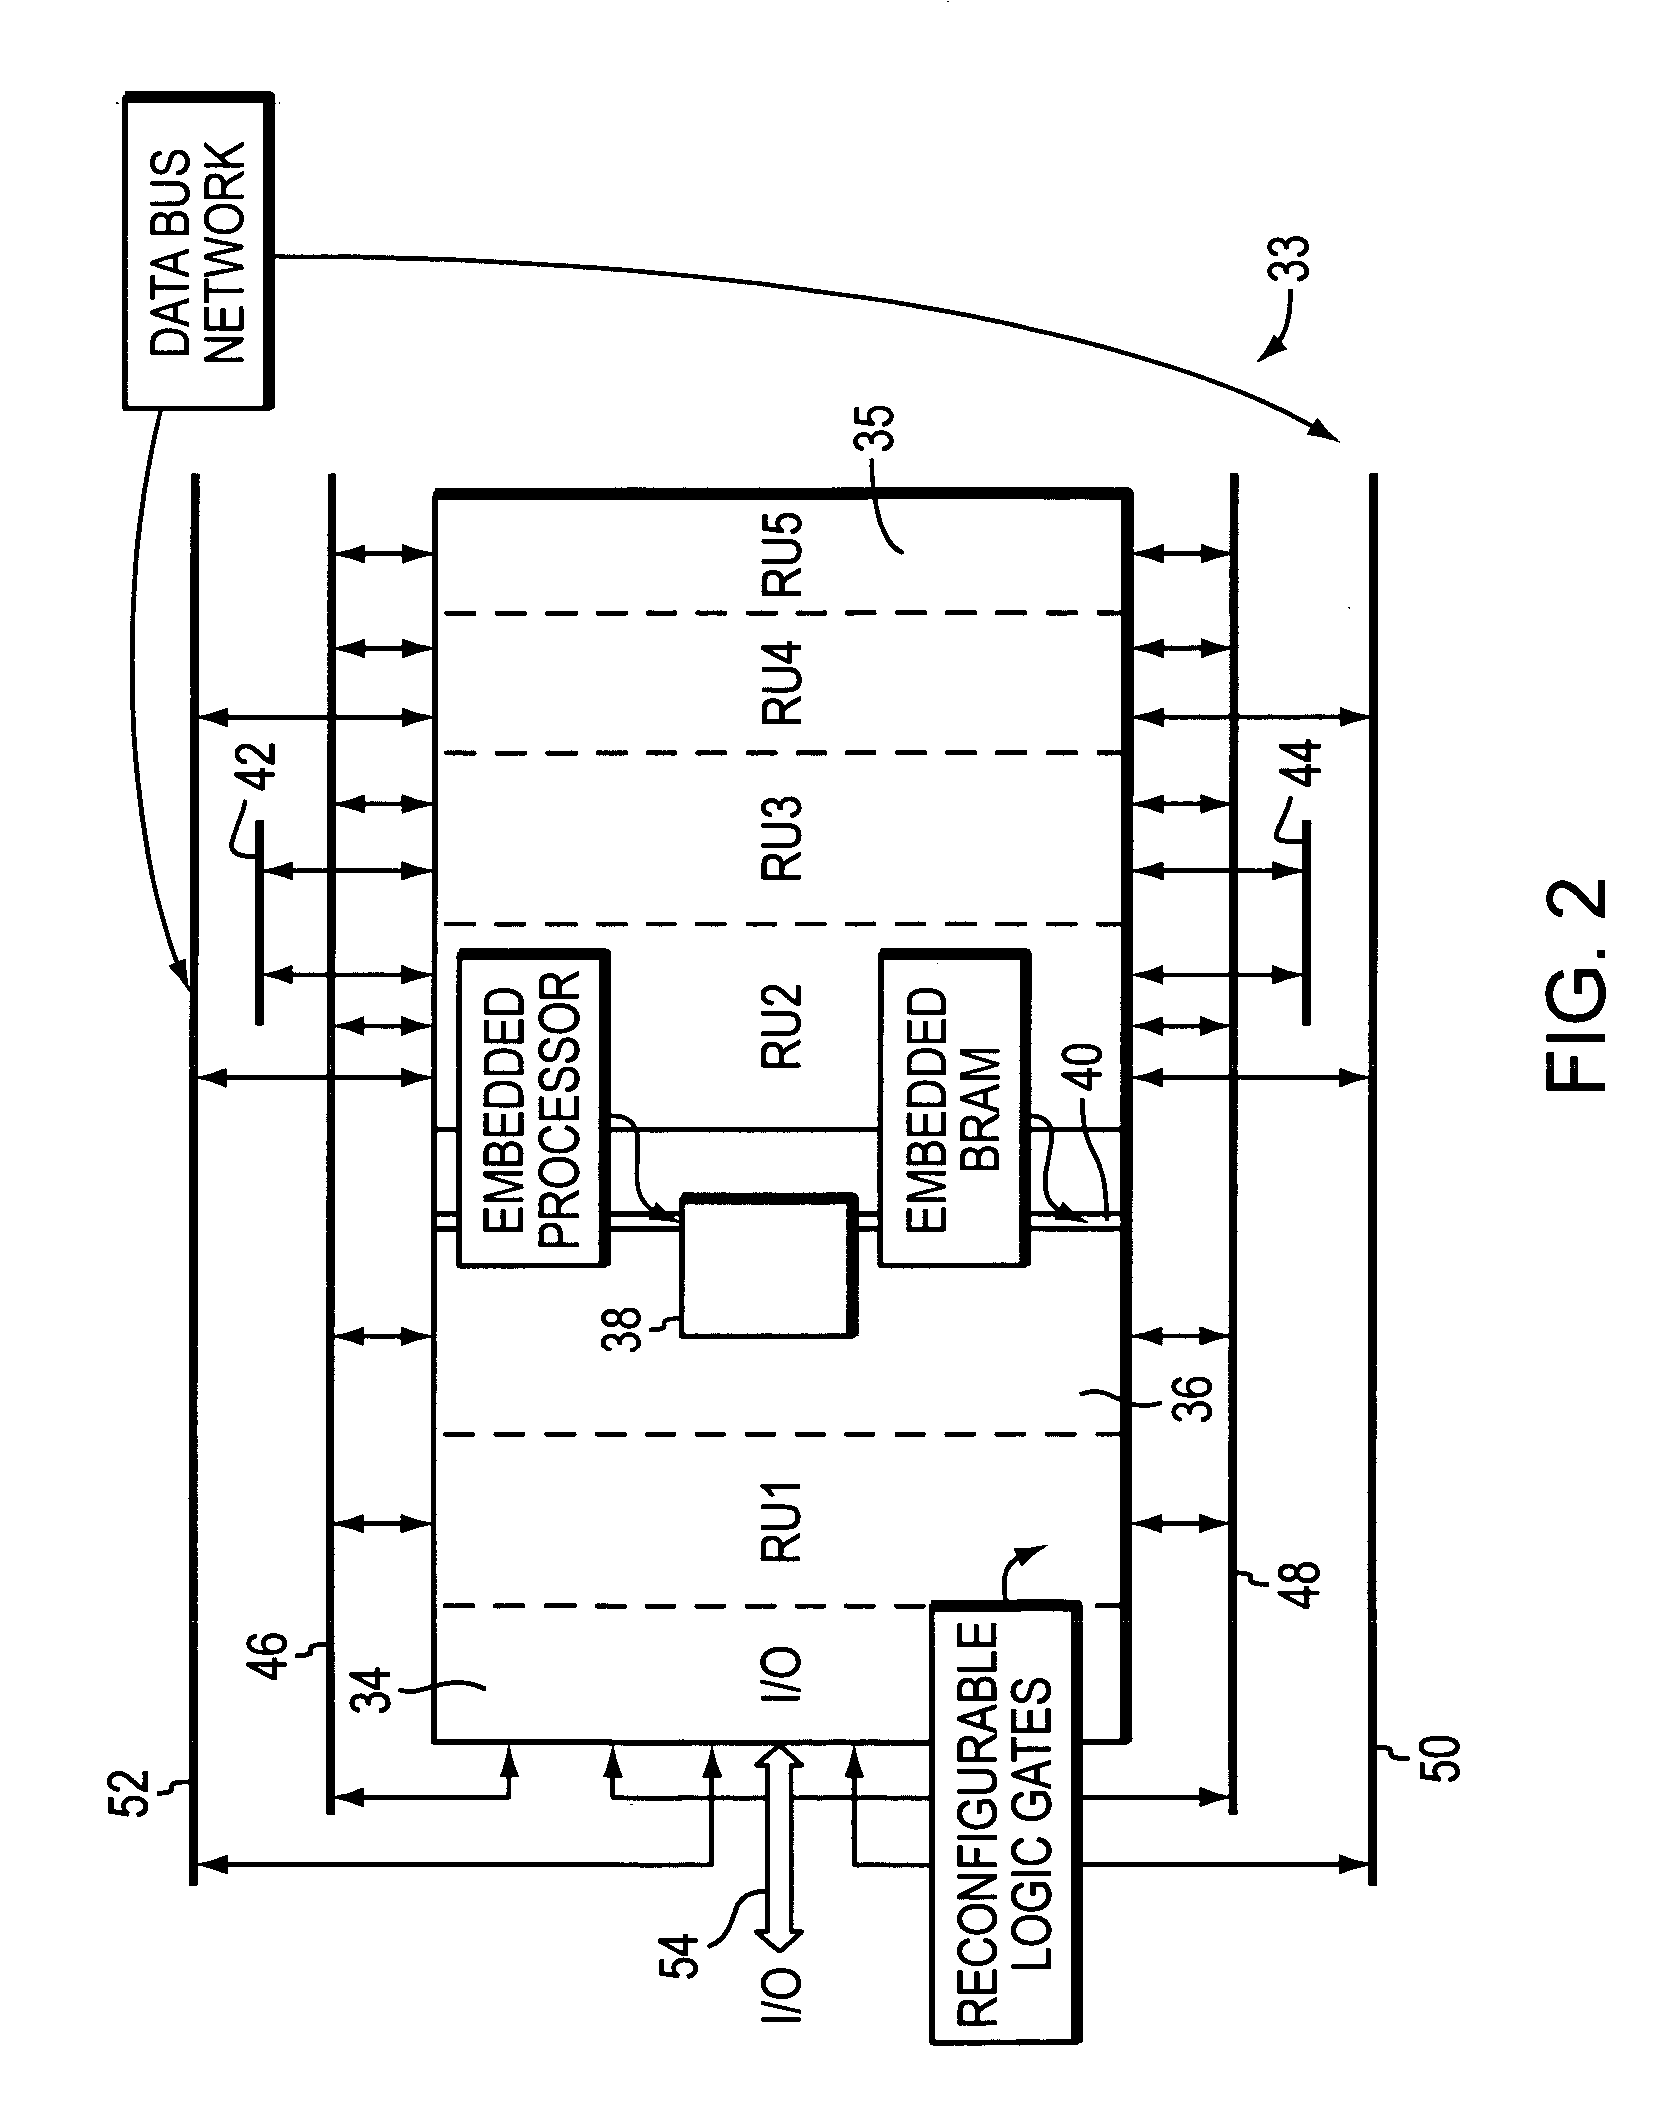 Systems and methods for reconfigurable computing